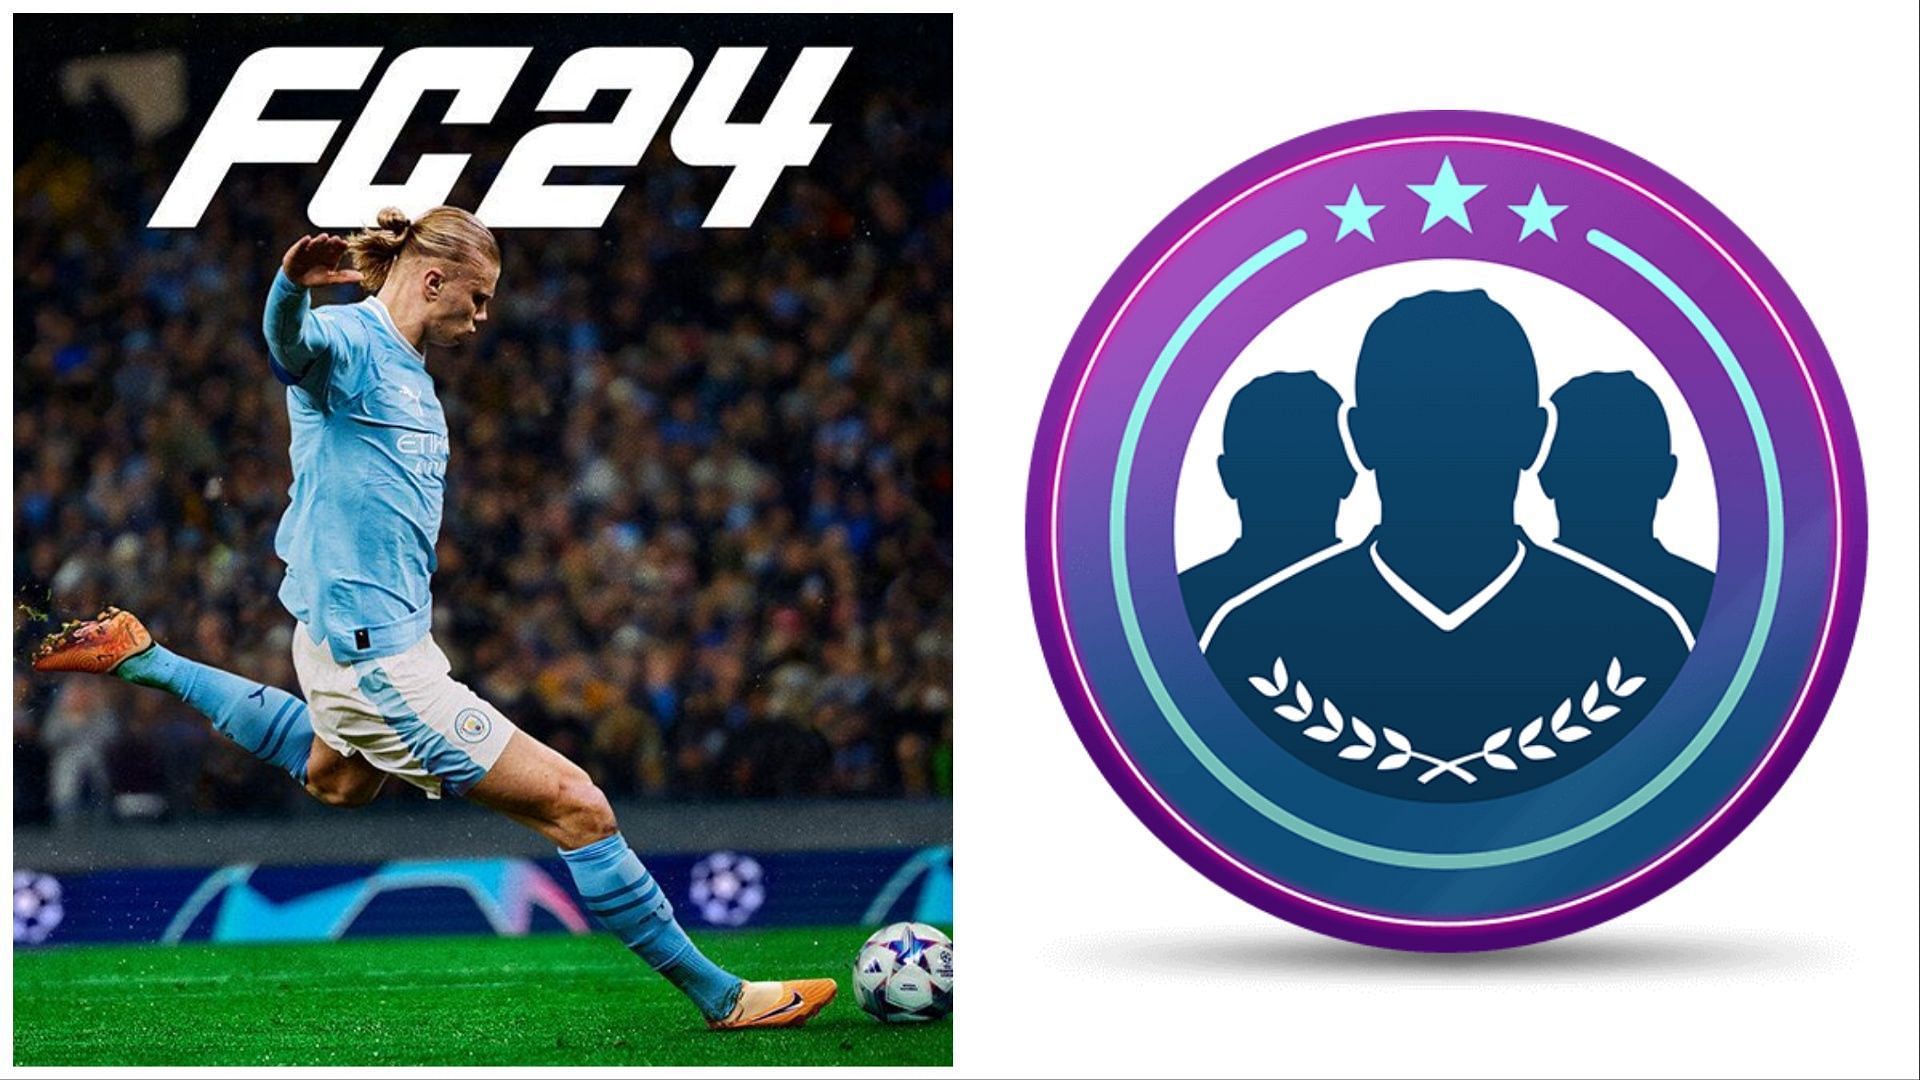 FIFA 22 Ultimate Edition out now - how to get the web app and the